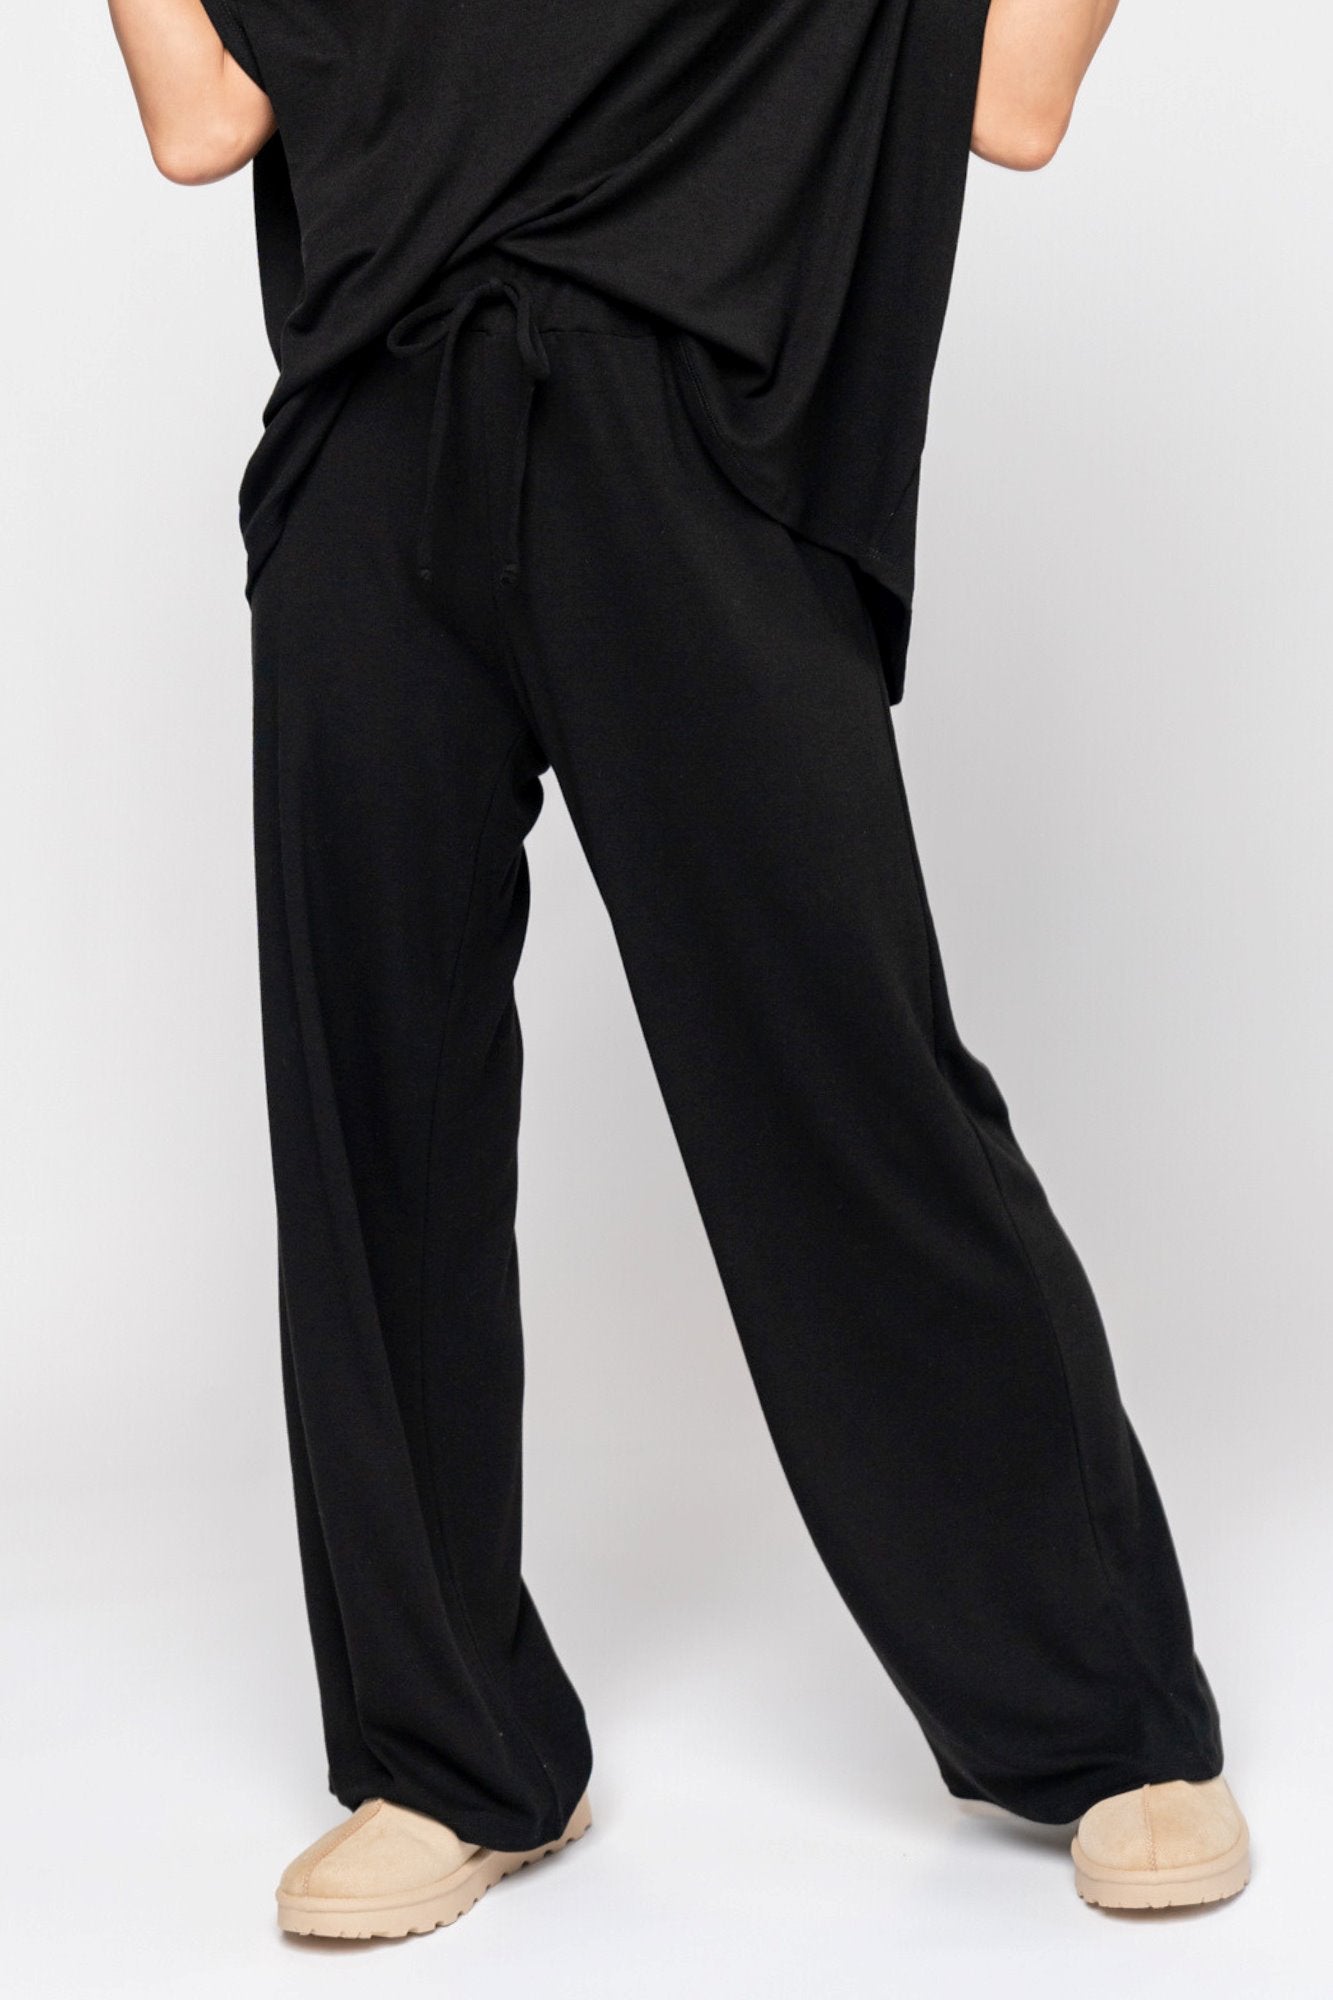 Travel Pant in Black Holley Girl 